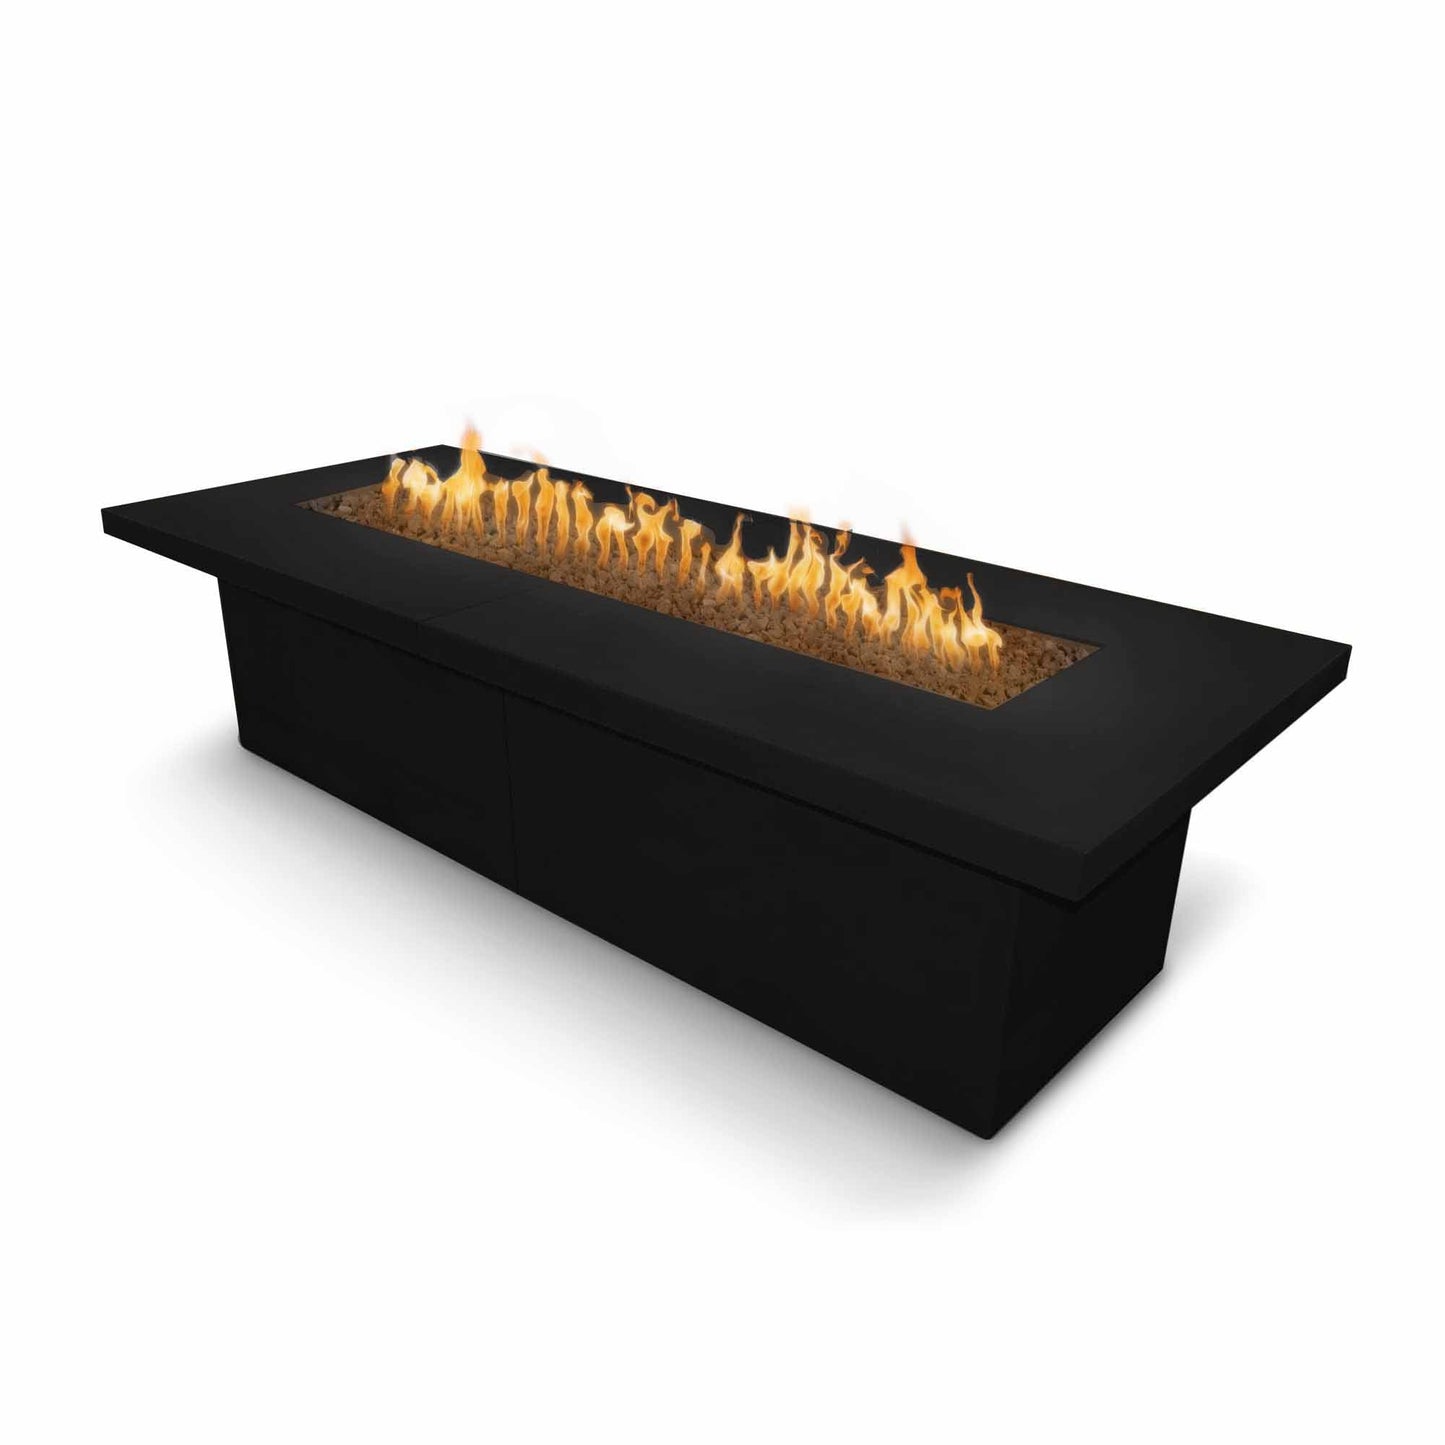 The Outdoor Plus Rectangular Newport 144" Stainless Steel Liquid Propane Fire Pit with 110V Electronic Ignition